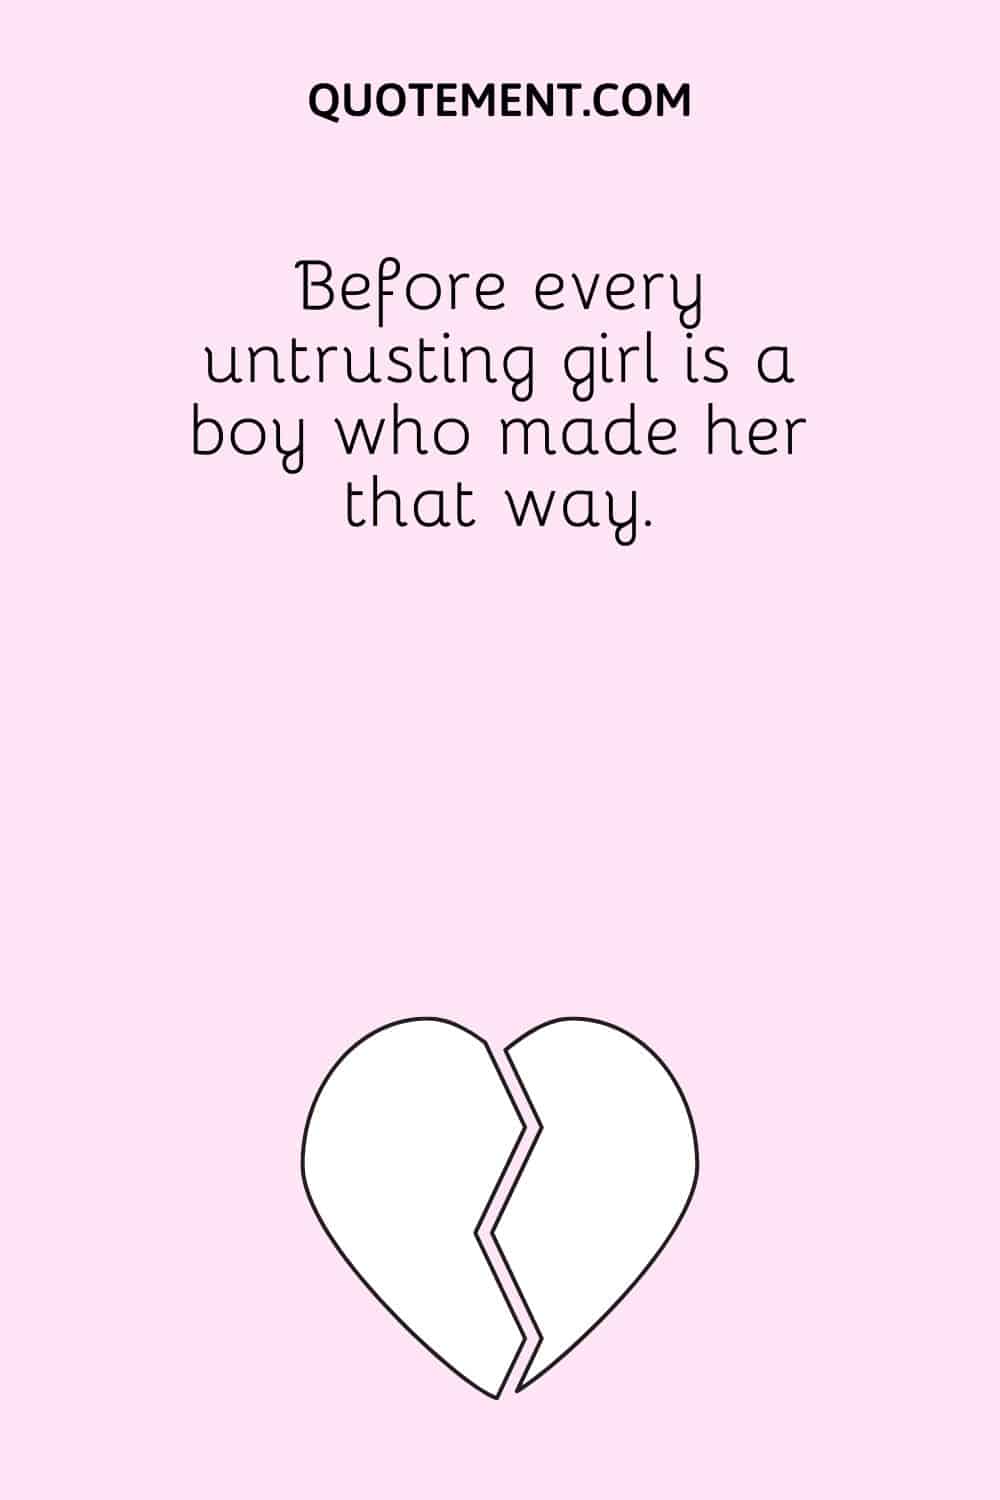 Before every untrusting girl is a boy who made her that way.